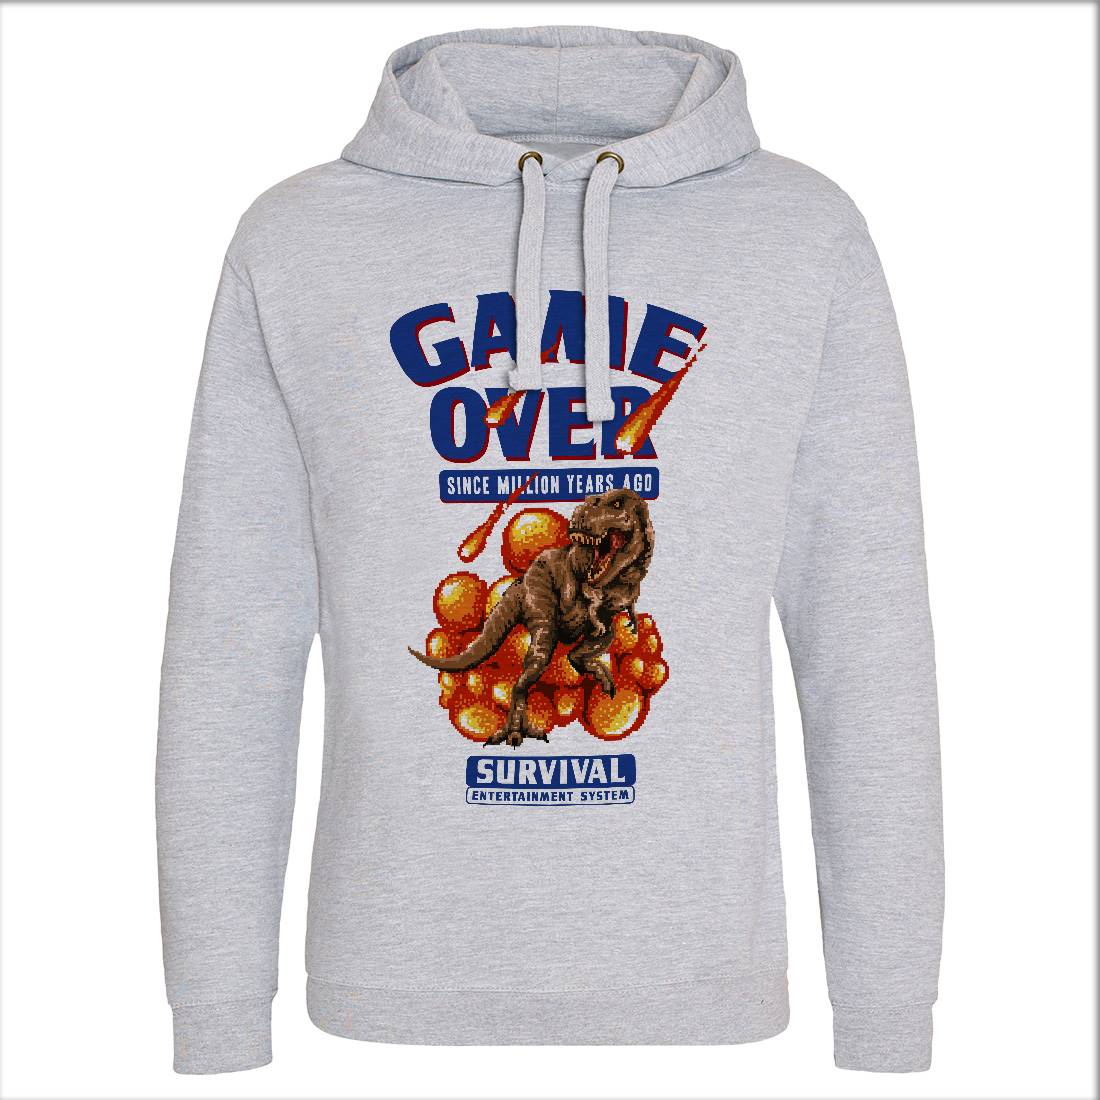 Game Over Dino Mens Hoodie Without Pocket Geek B902